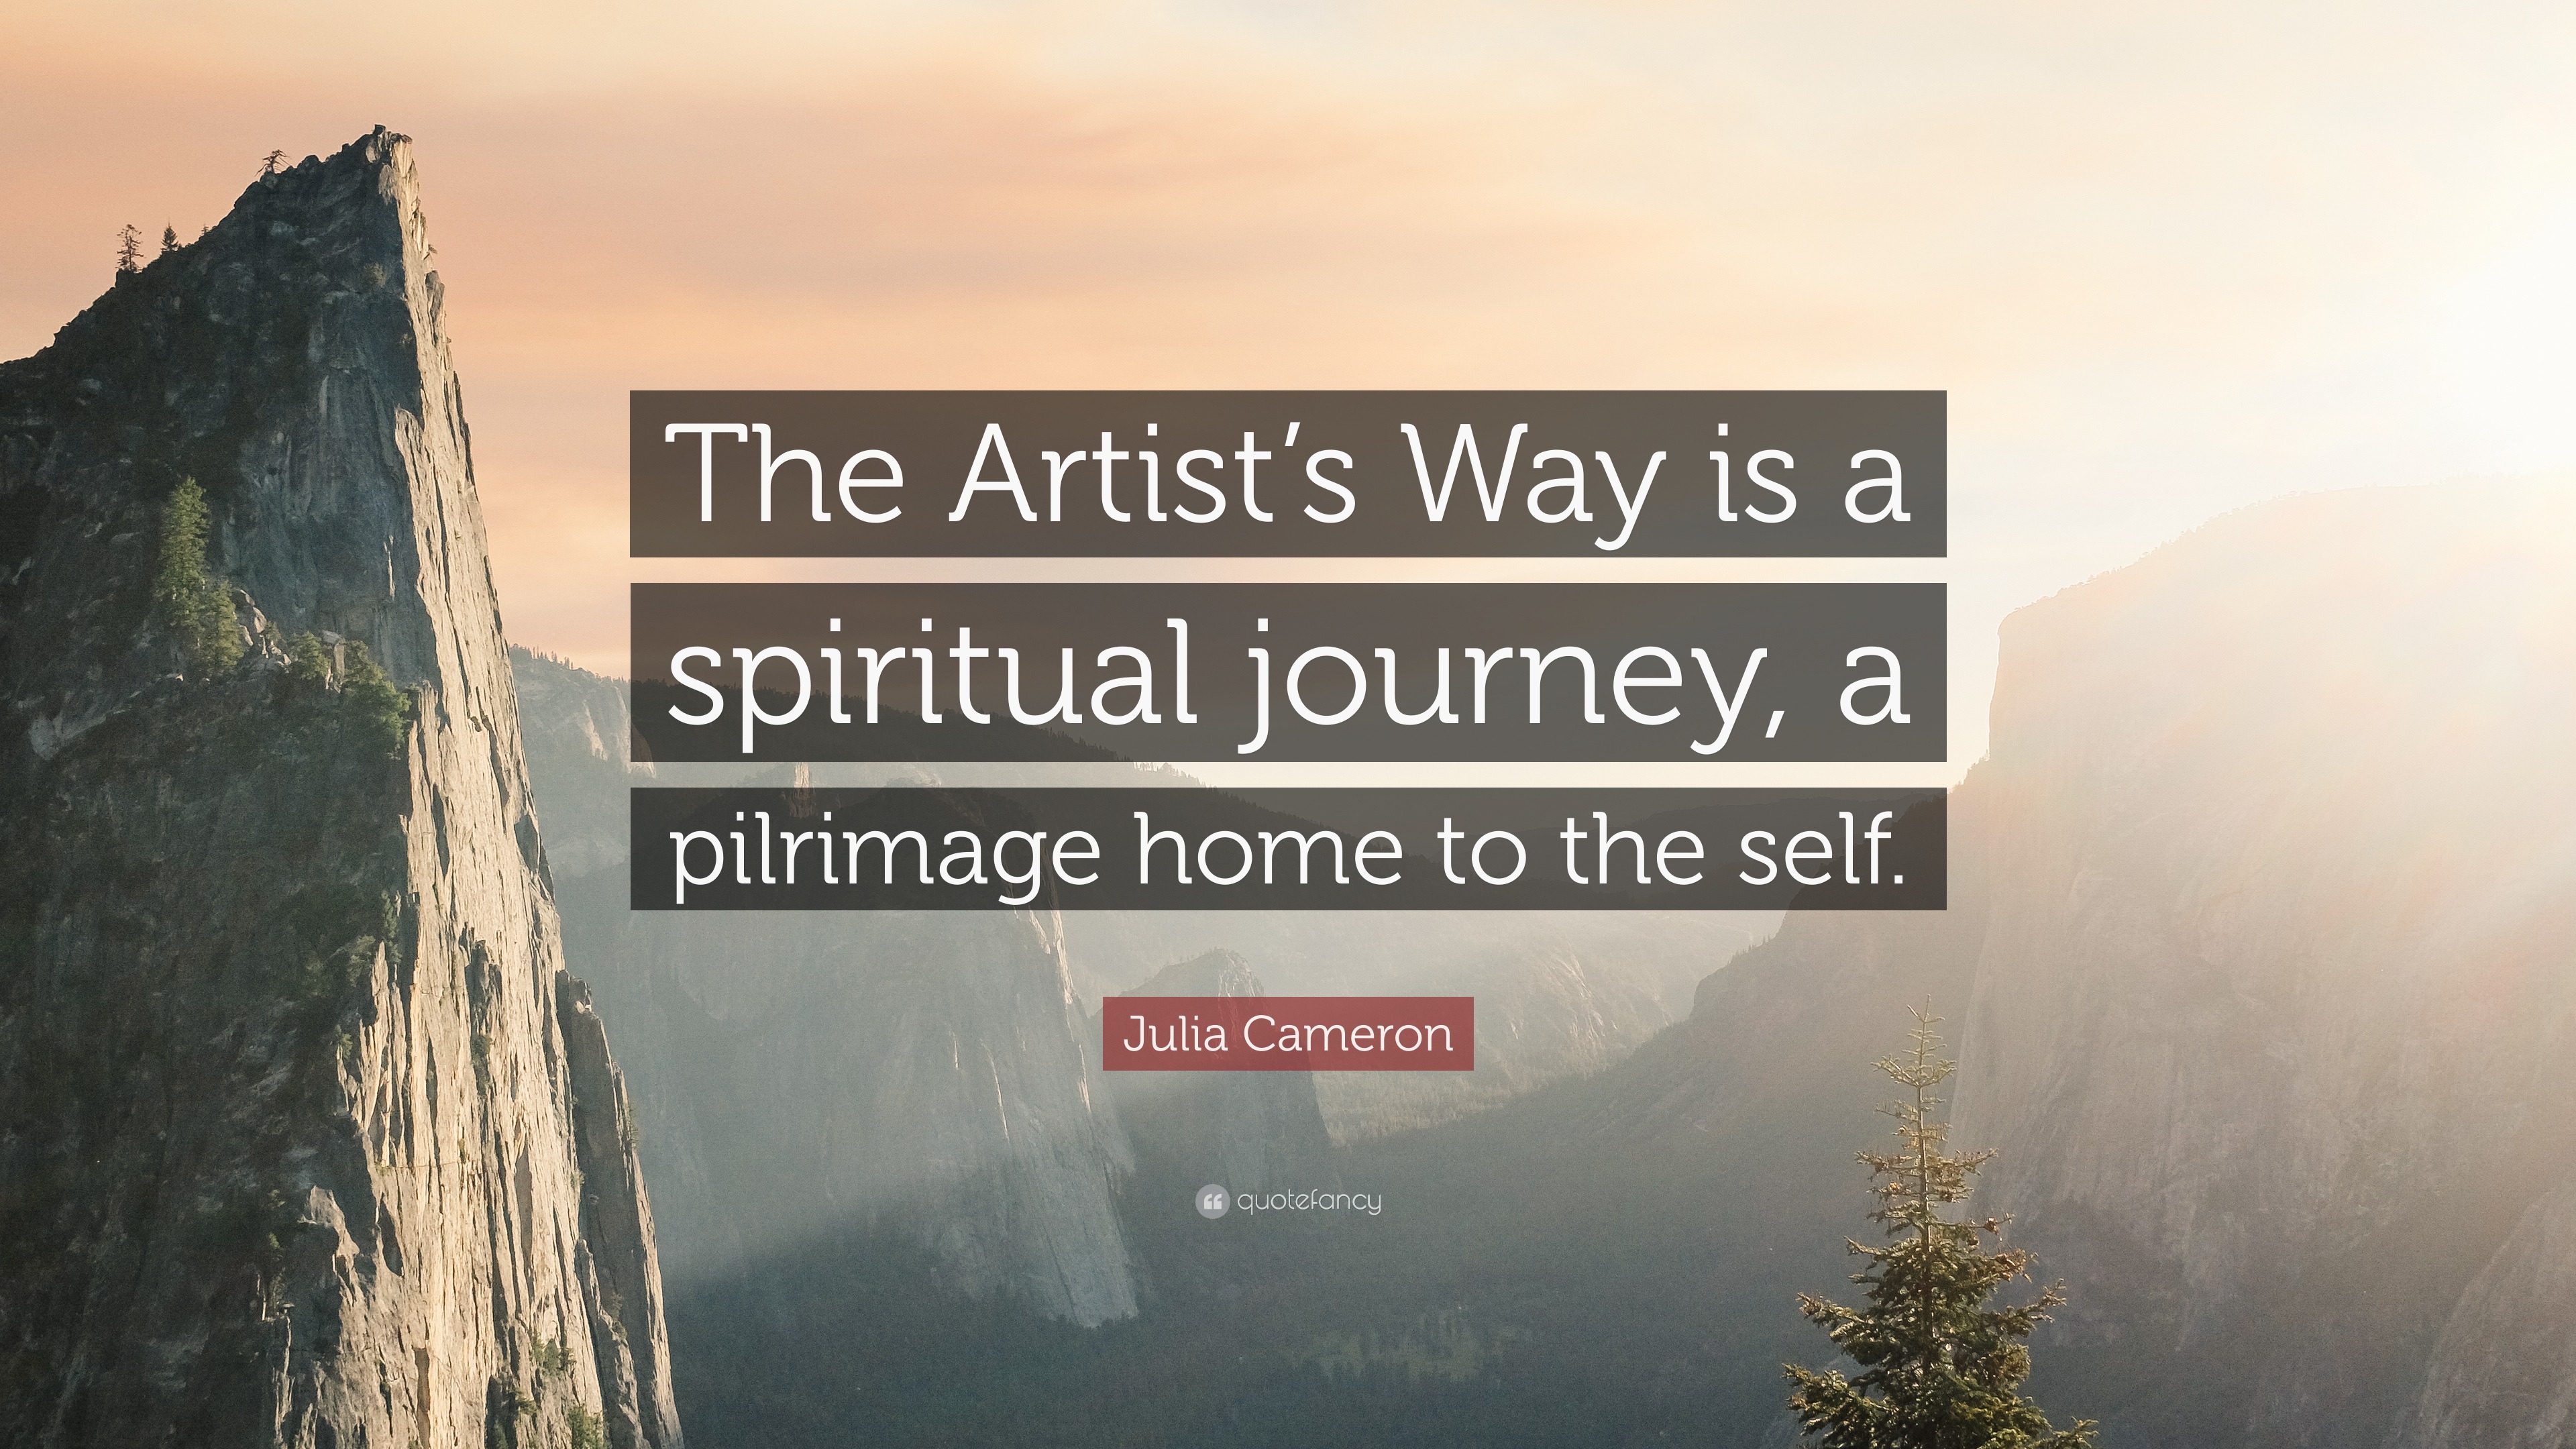 Julia Cameron Quote: “The Artist's Way is a spiritual journey, a